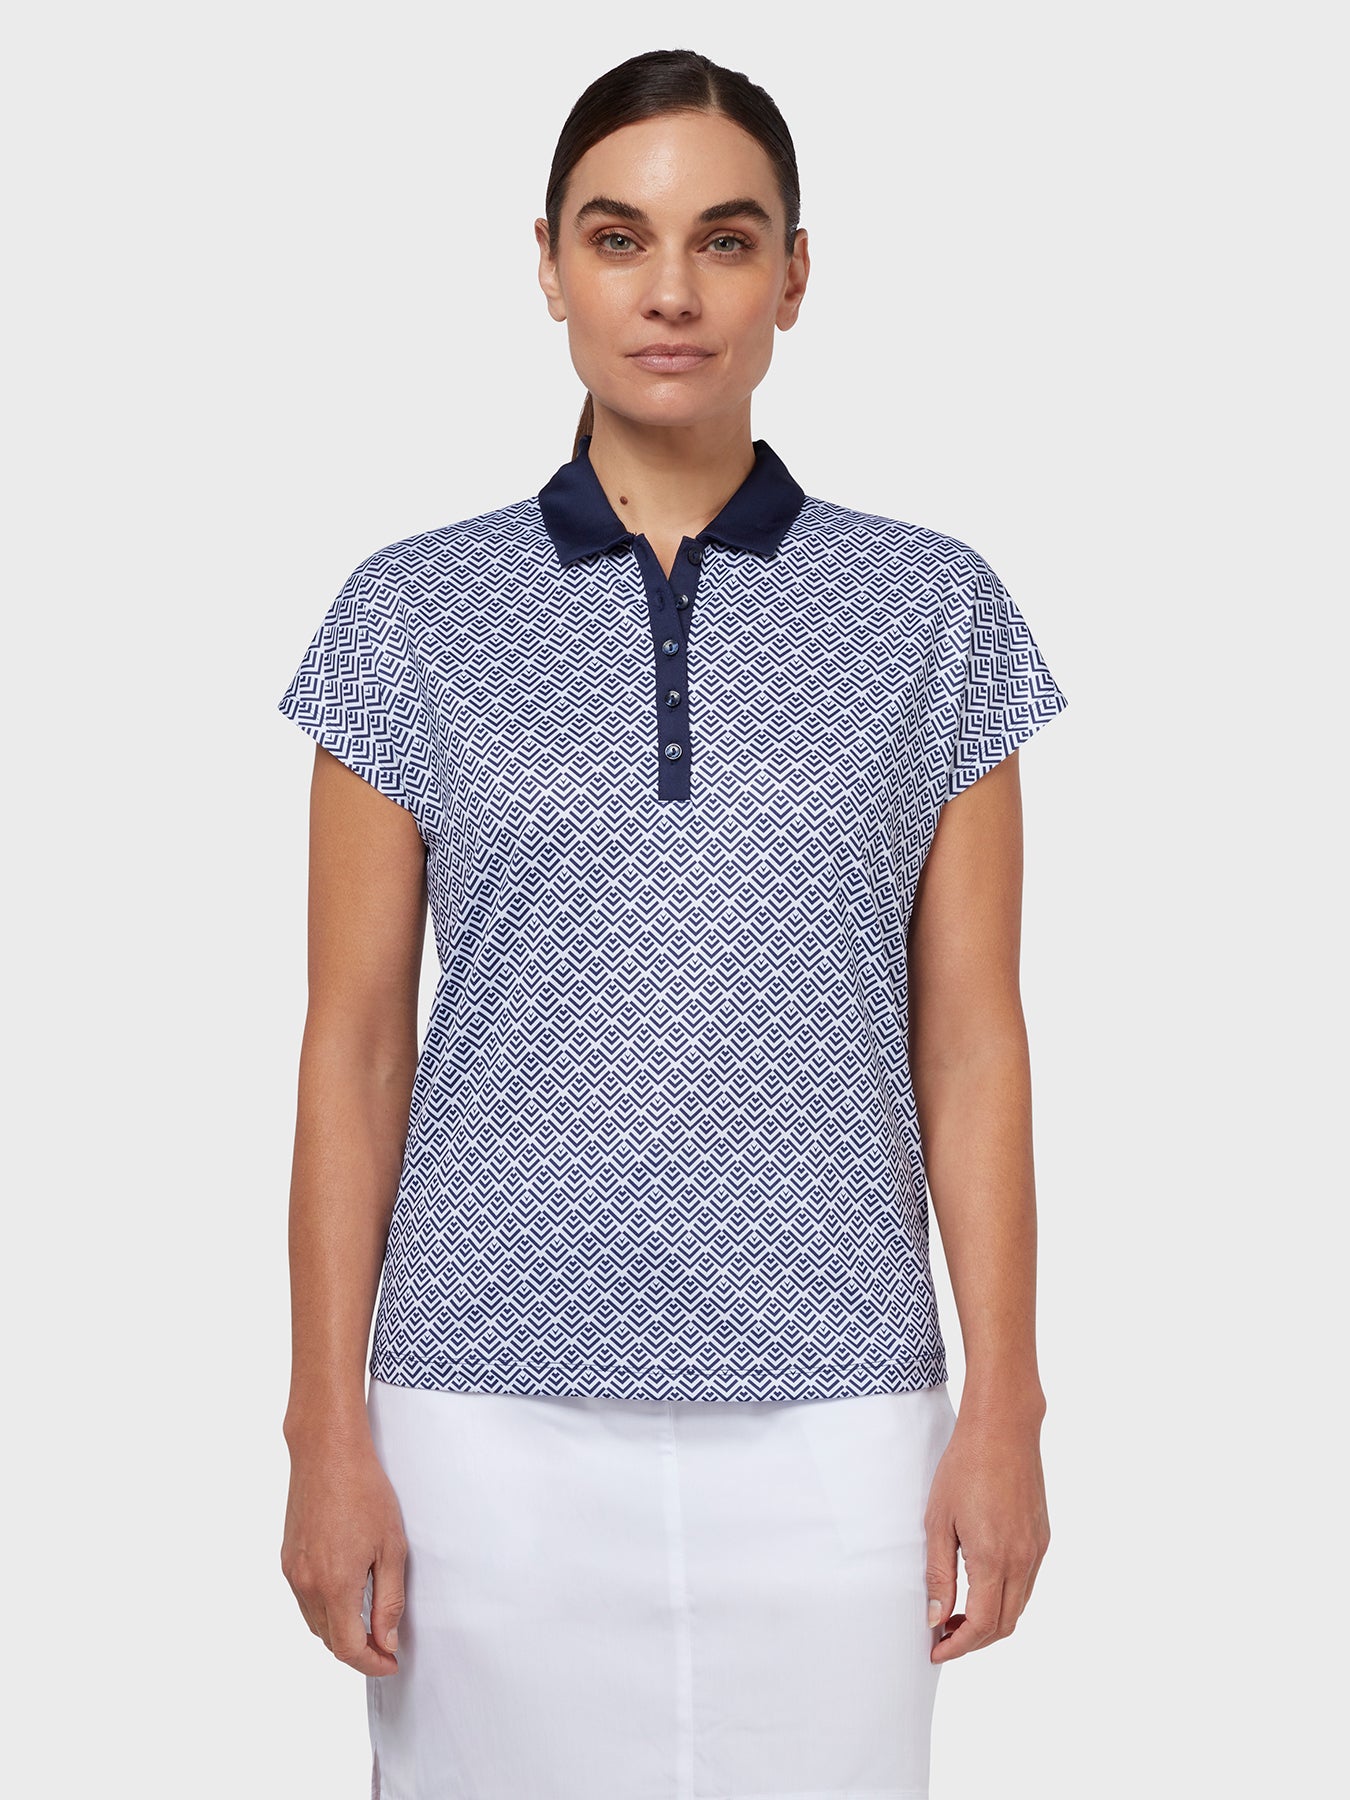 View Chev Printed Womens Polo In Blue Geo Brilliant White XXL information